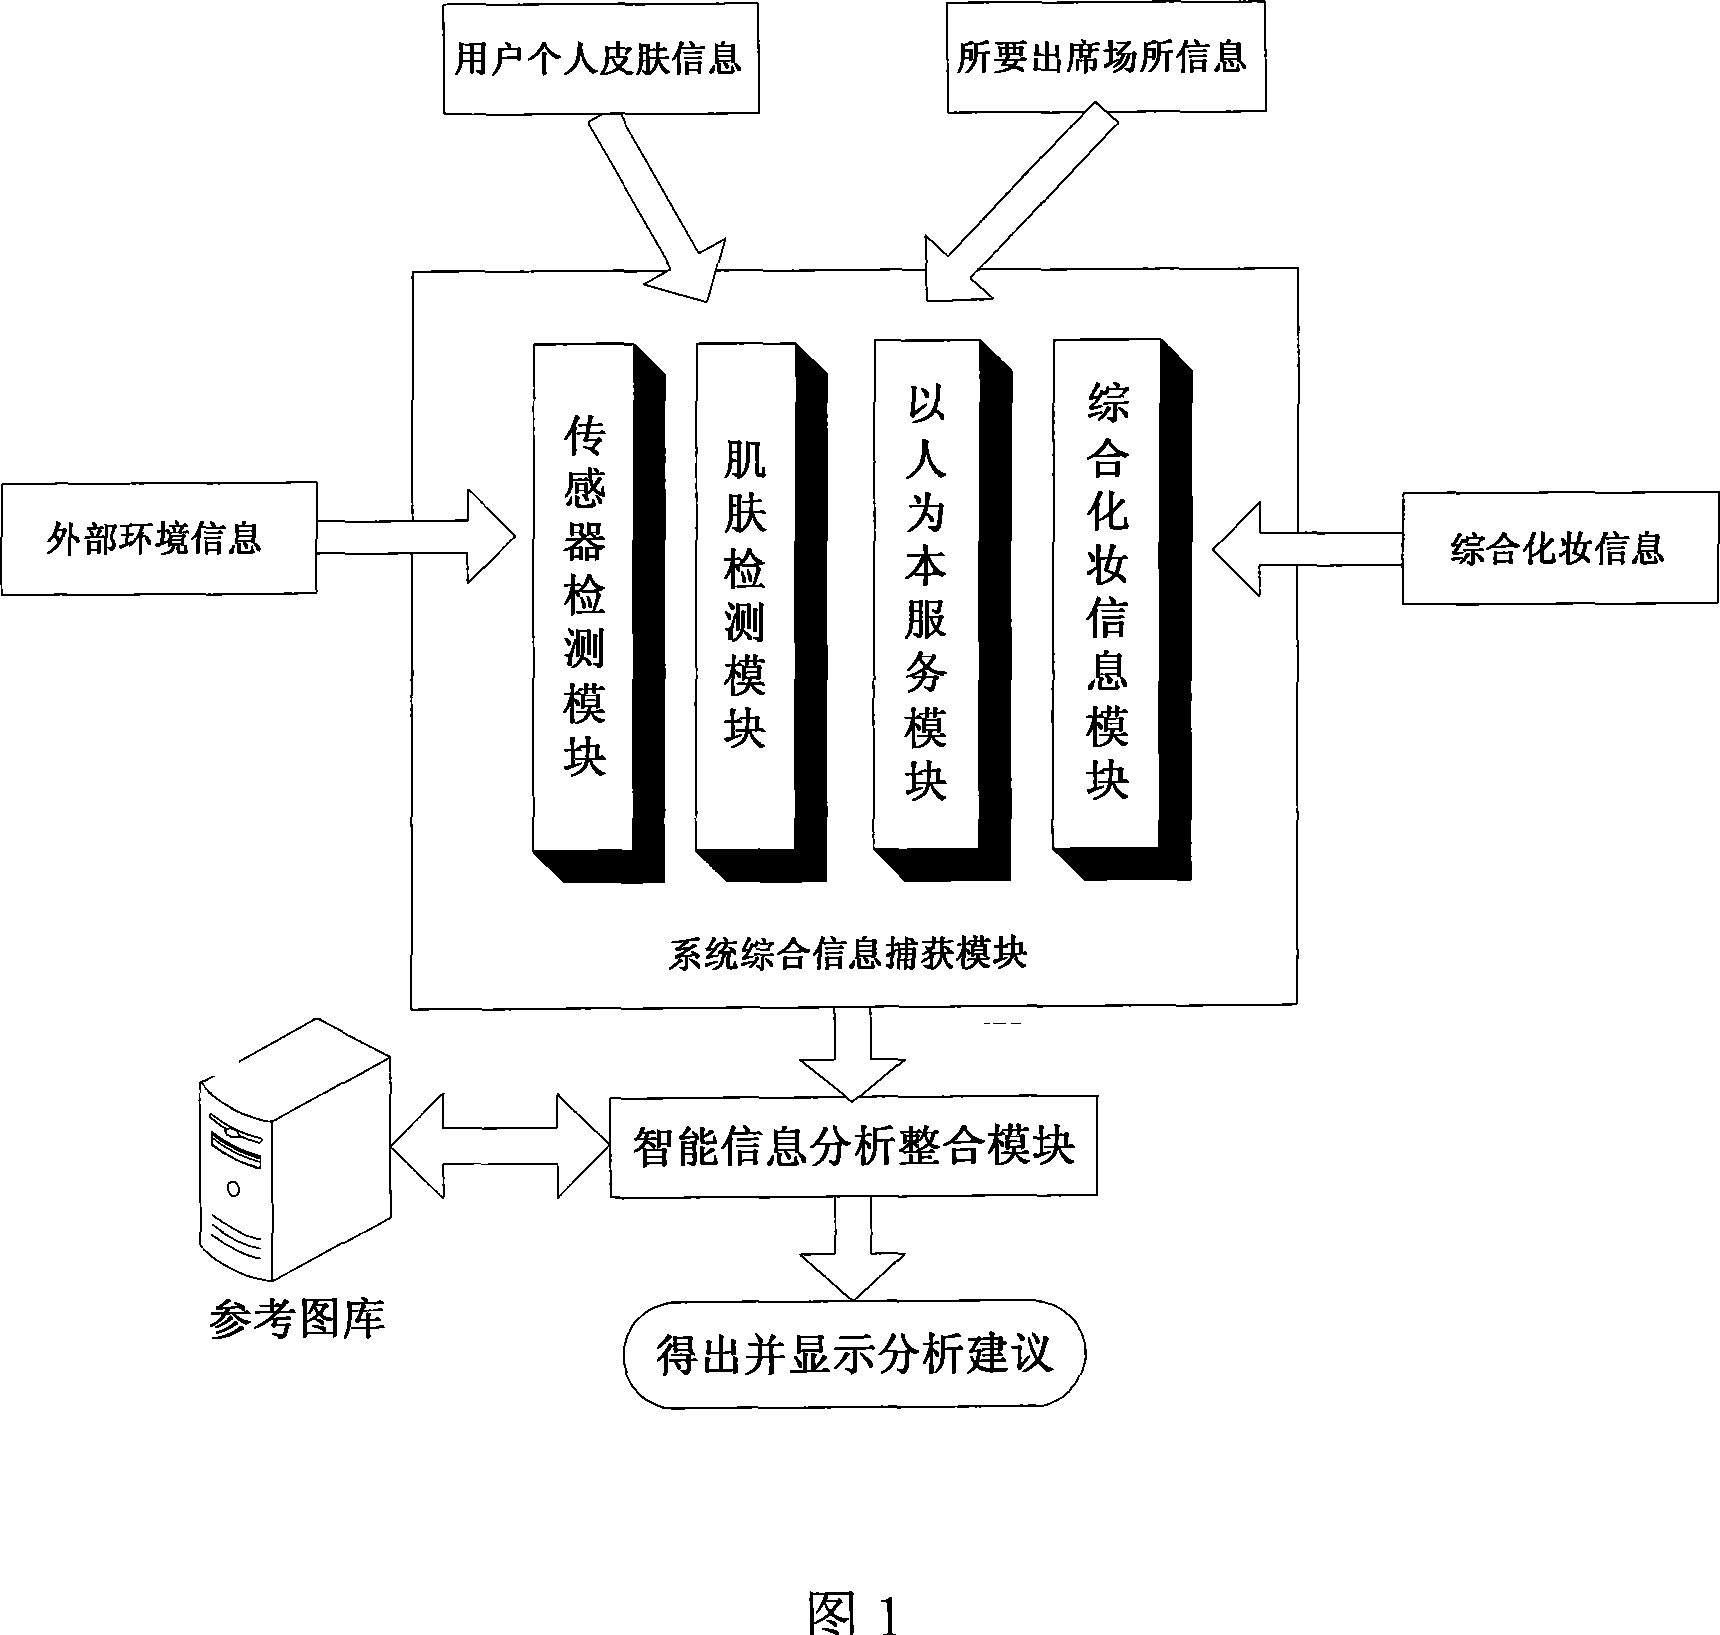 Suggesting system for wearing make-up based on environment sensing